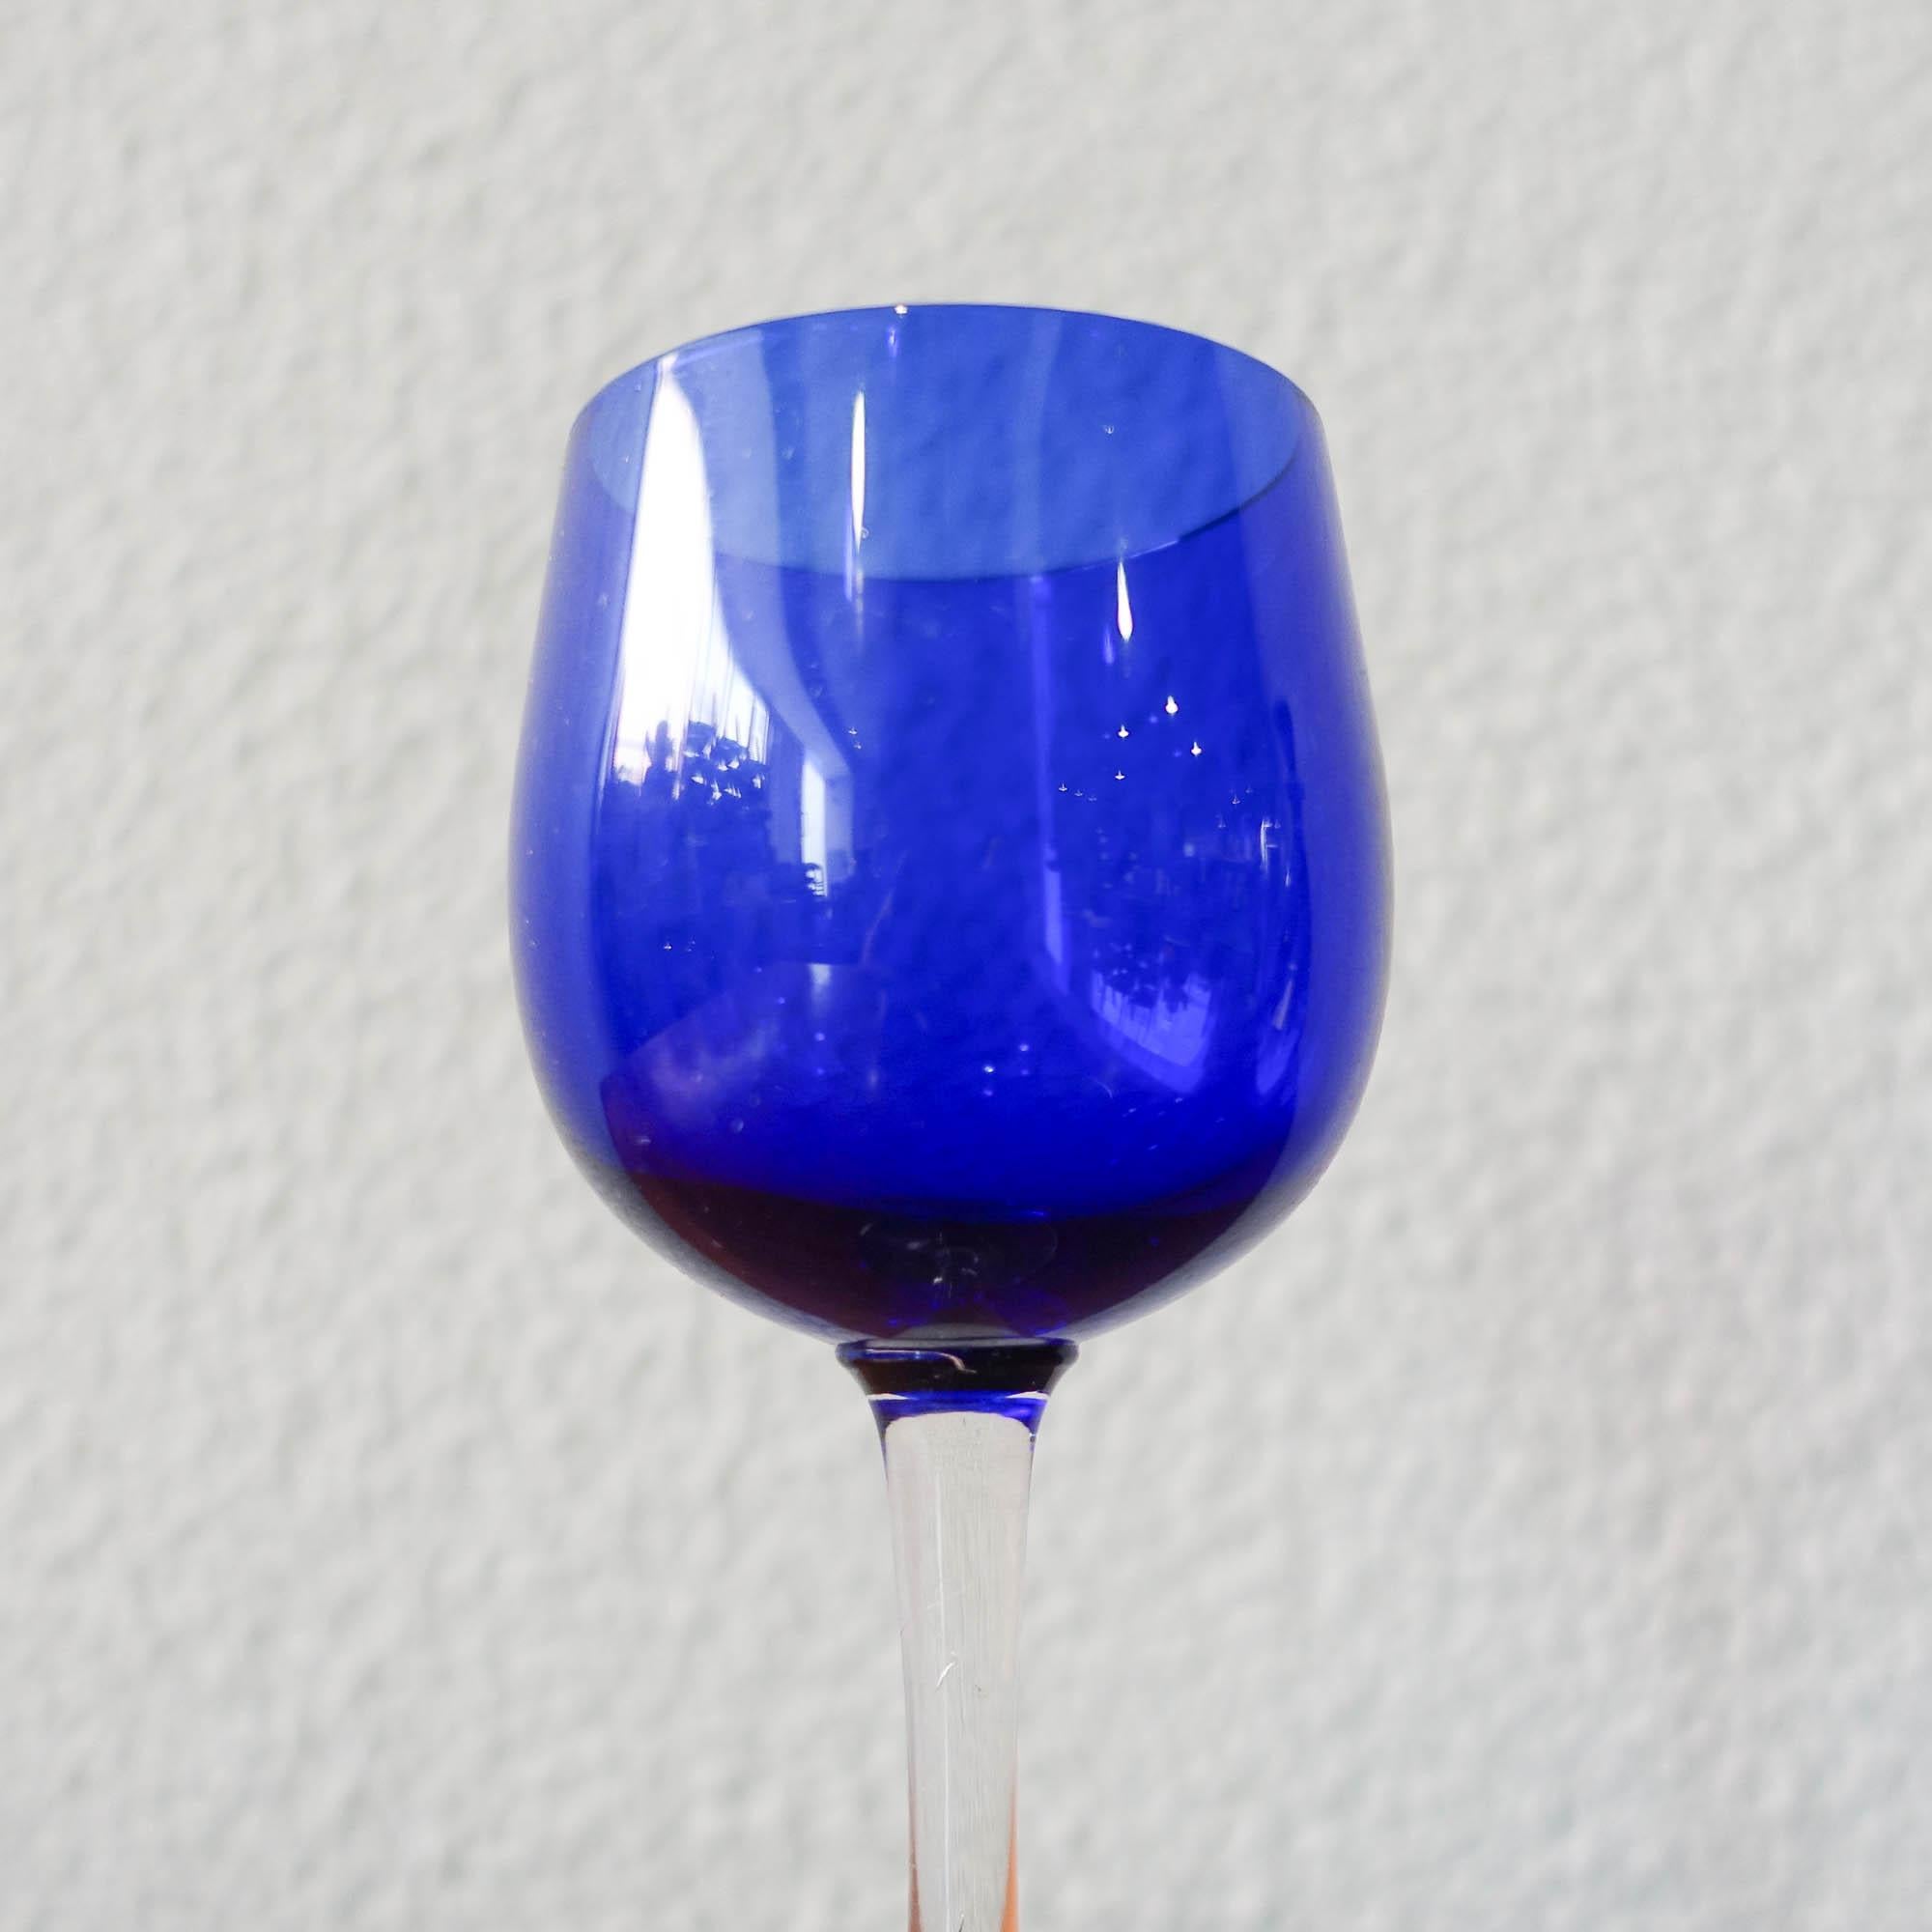 Mid-20th Century Bottle and Two Glasses in Cobalt Blue by Marinha Grande, 1950's For Sale